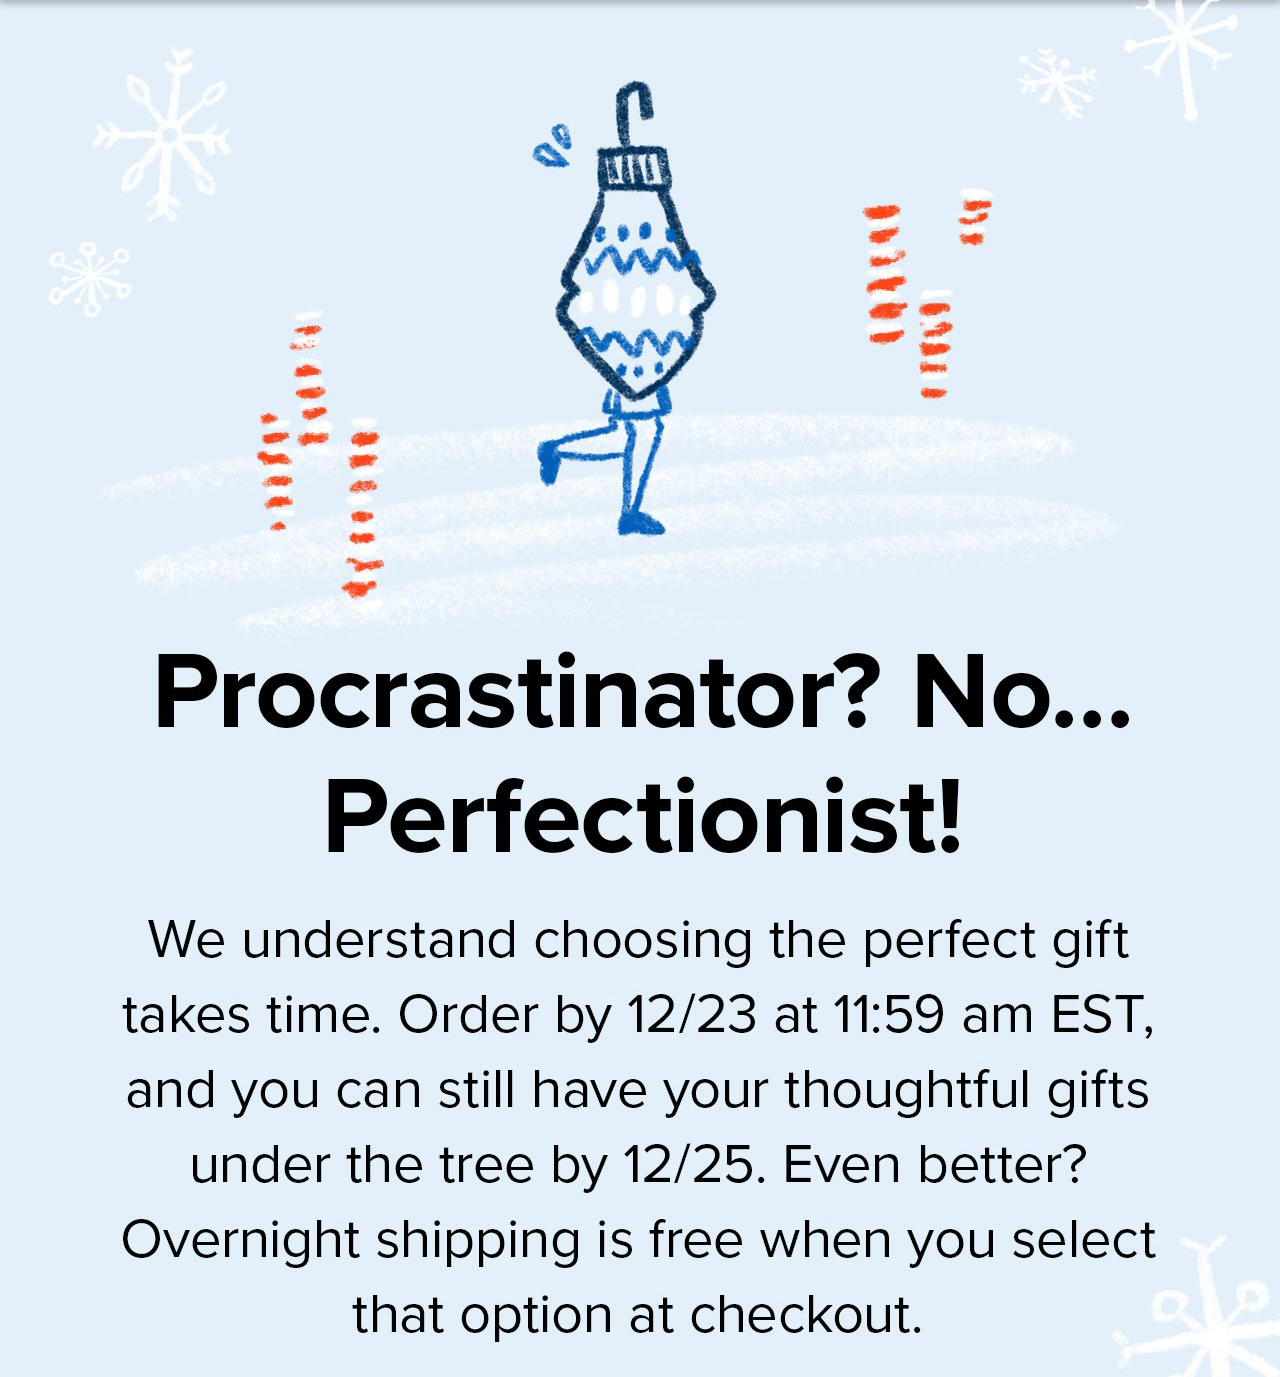 Procrastinator? No... Perfectionist! We understand choosing the perfect gift takes time. Order by 12/23 at 11:59am EST, and you can still have your thoughtful gifts under the tree by 12/25. Even better? Overnight shipping is free when you select that option at checkout.